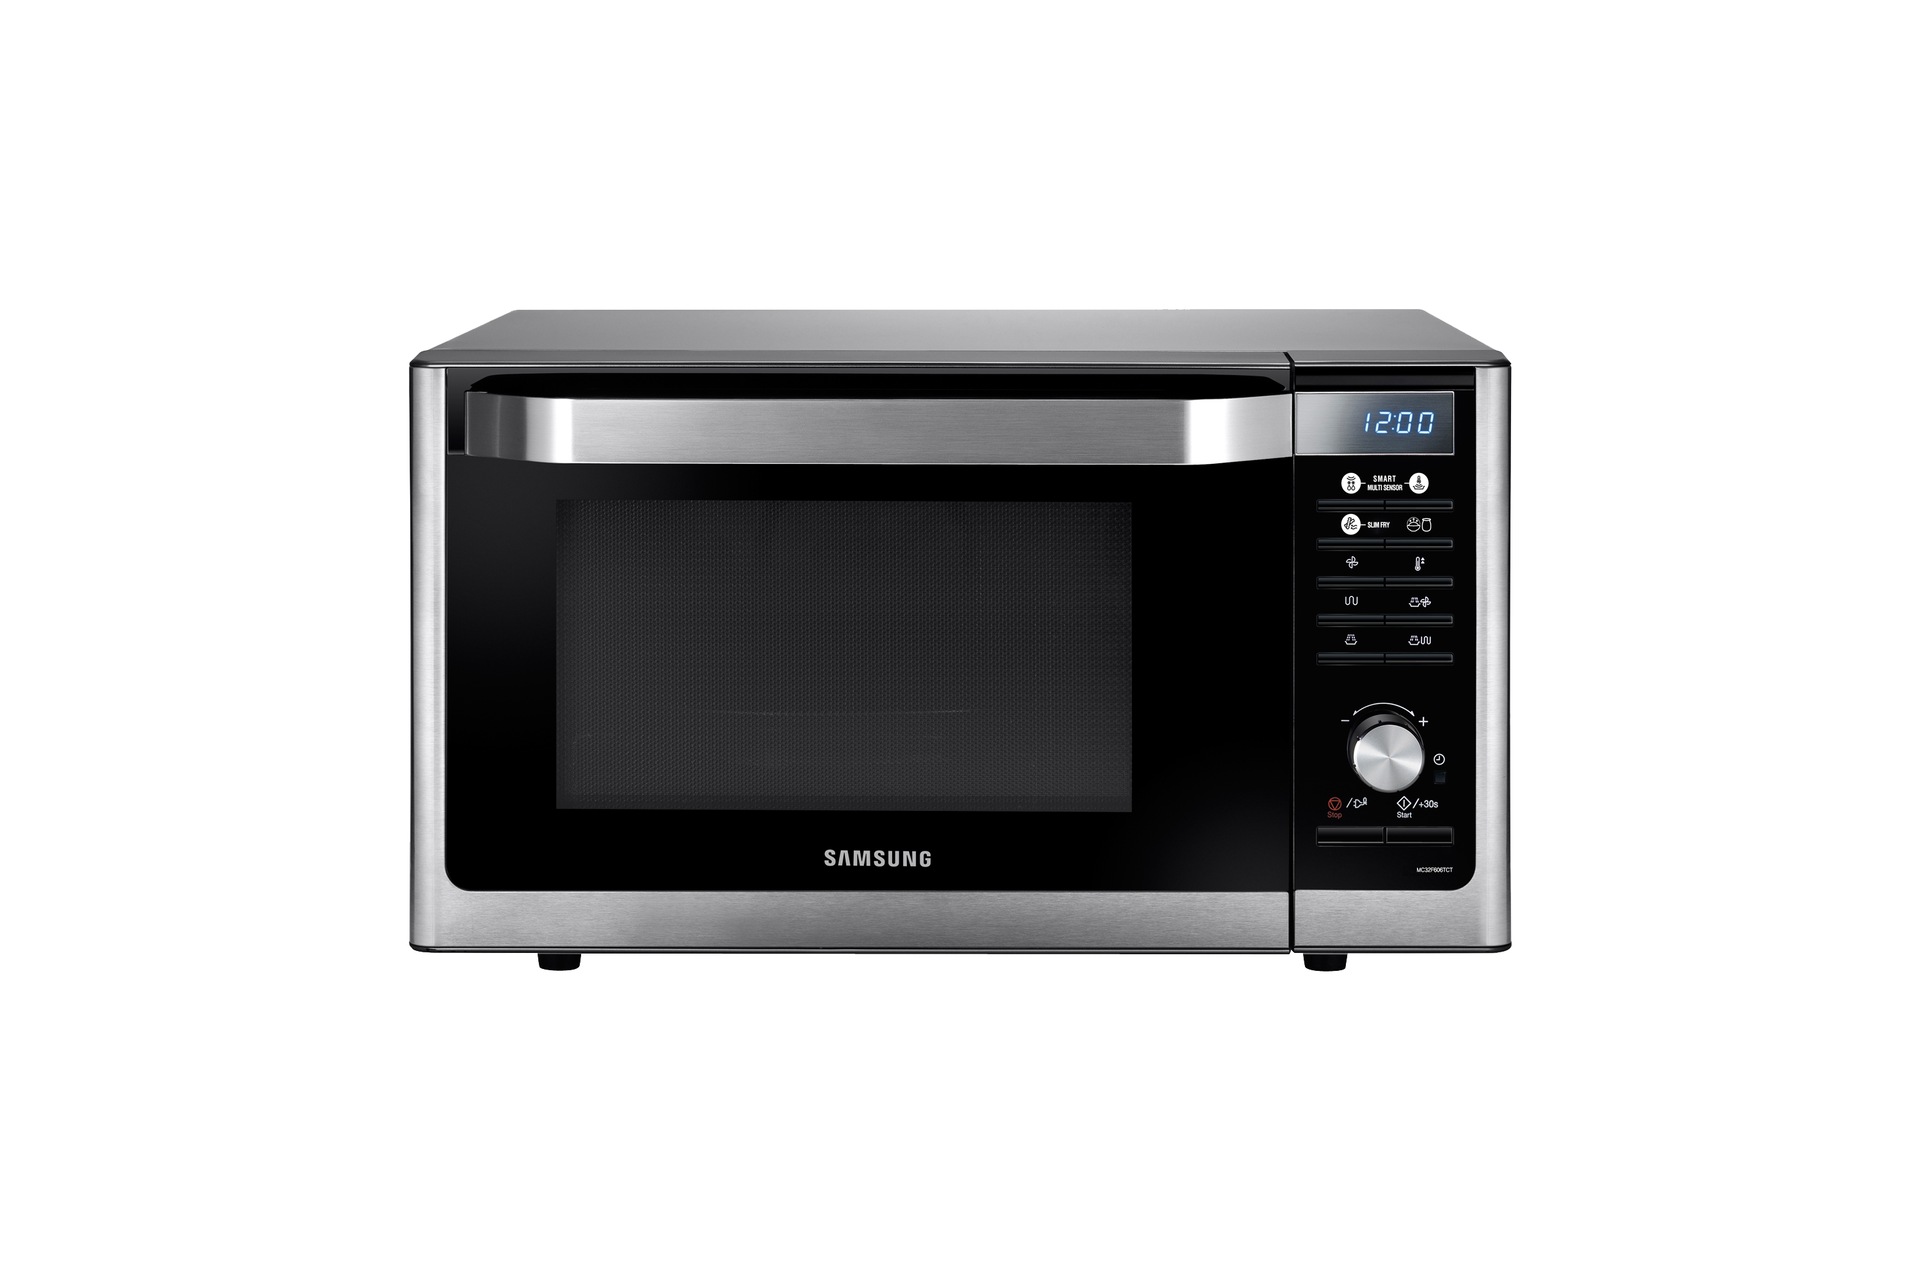 MC32F606TCT Convection MWO with Slim Fry, 32 L | Samsung Support South